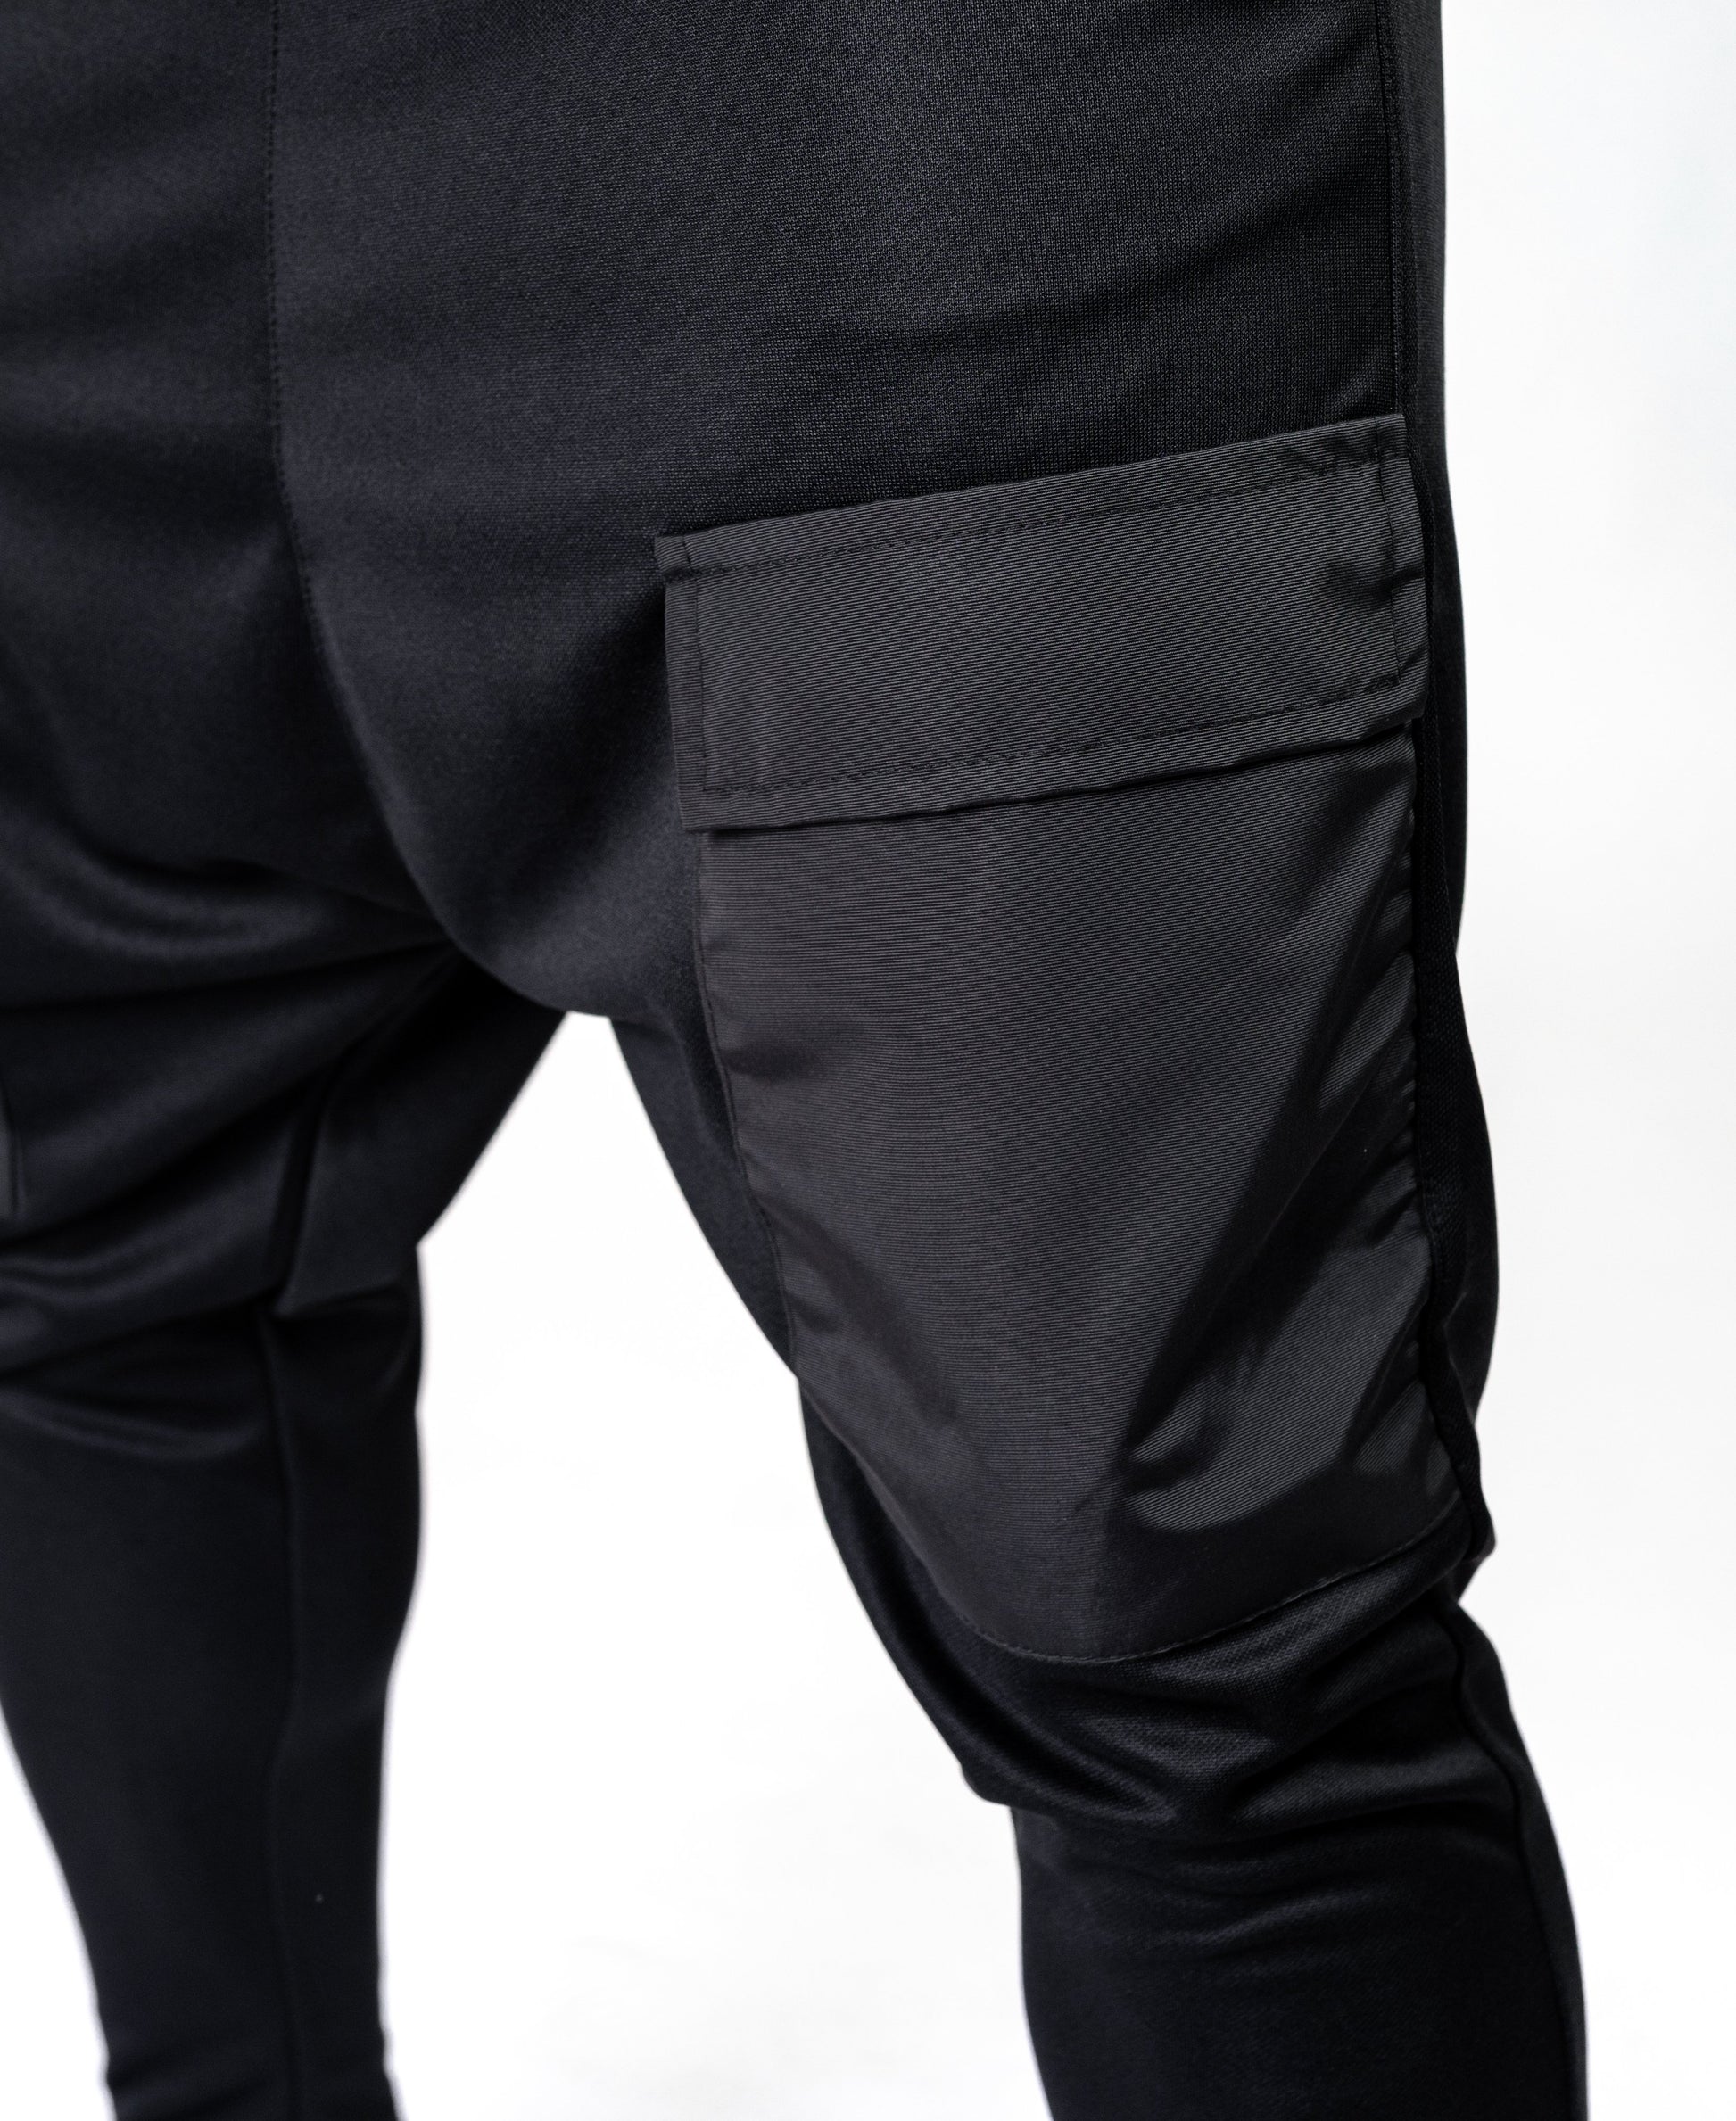 Black trousers with black pockets - Fatai Style